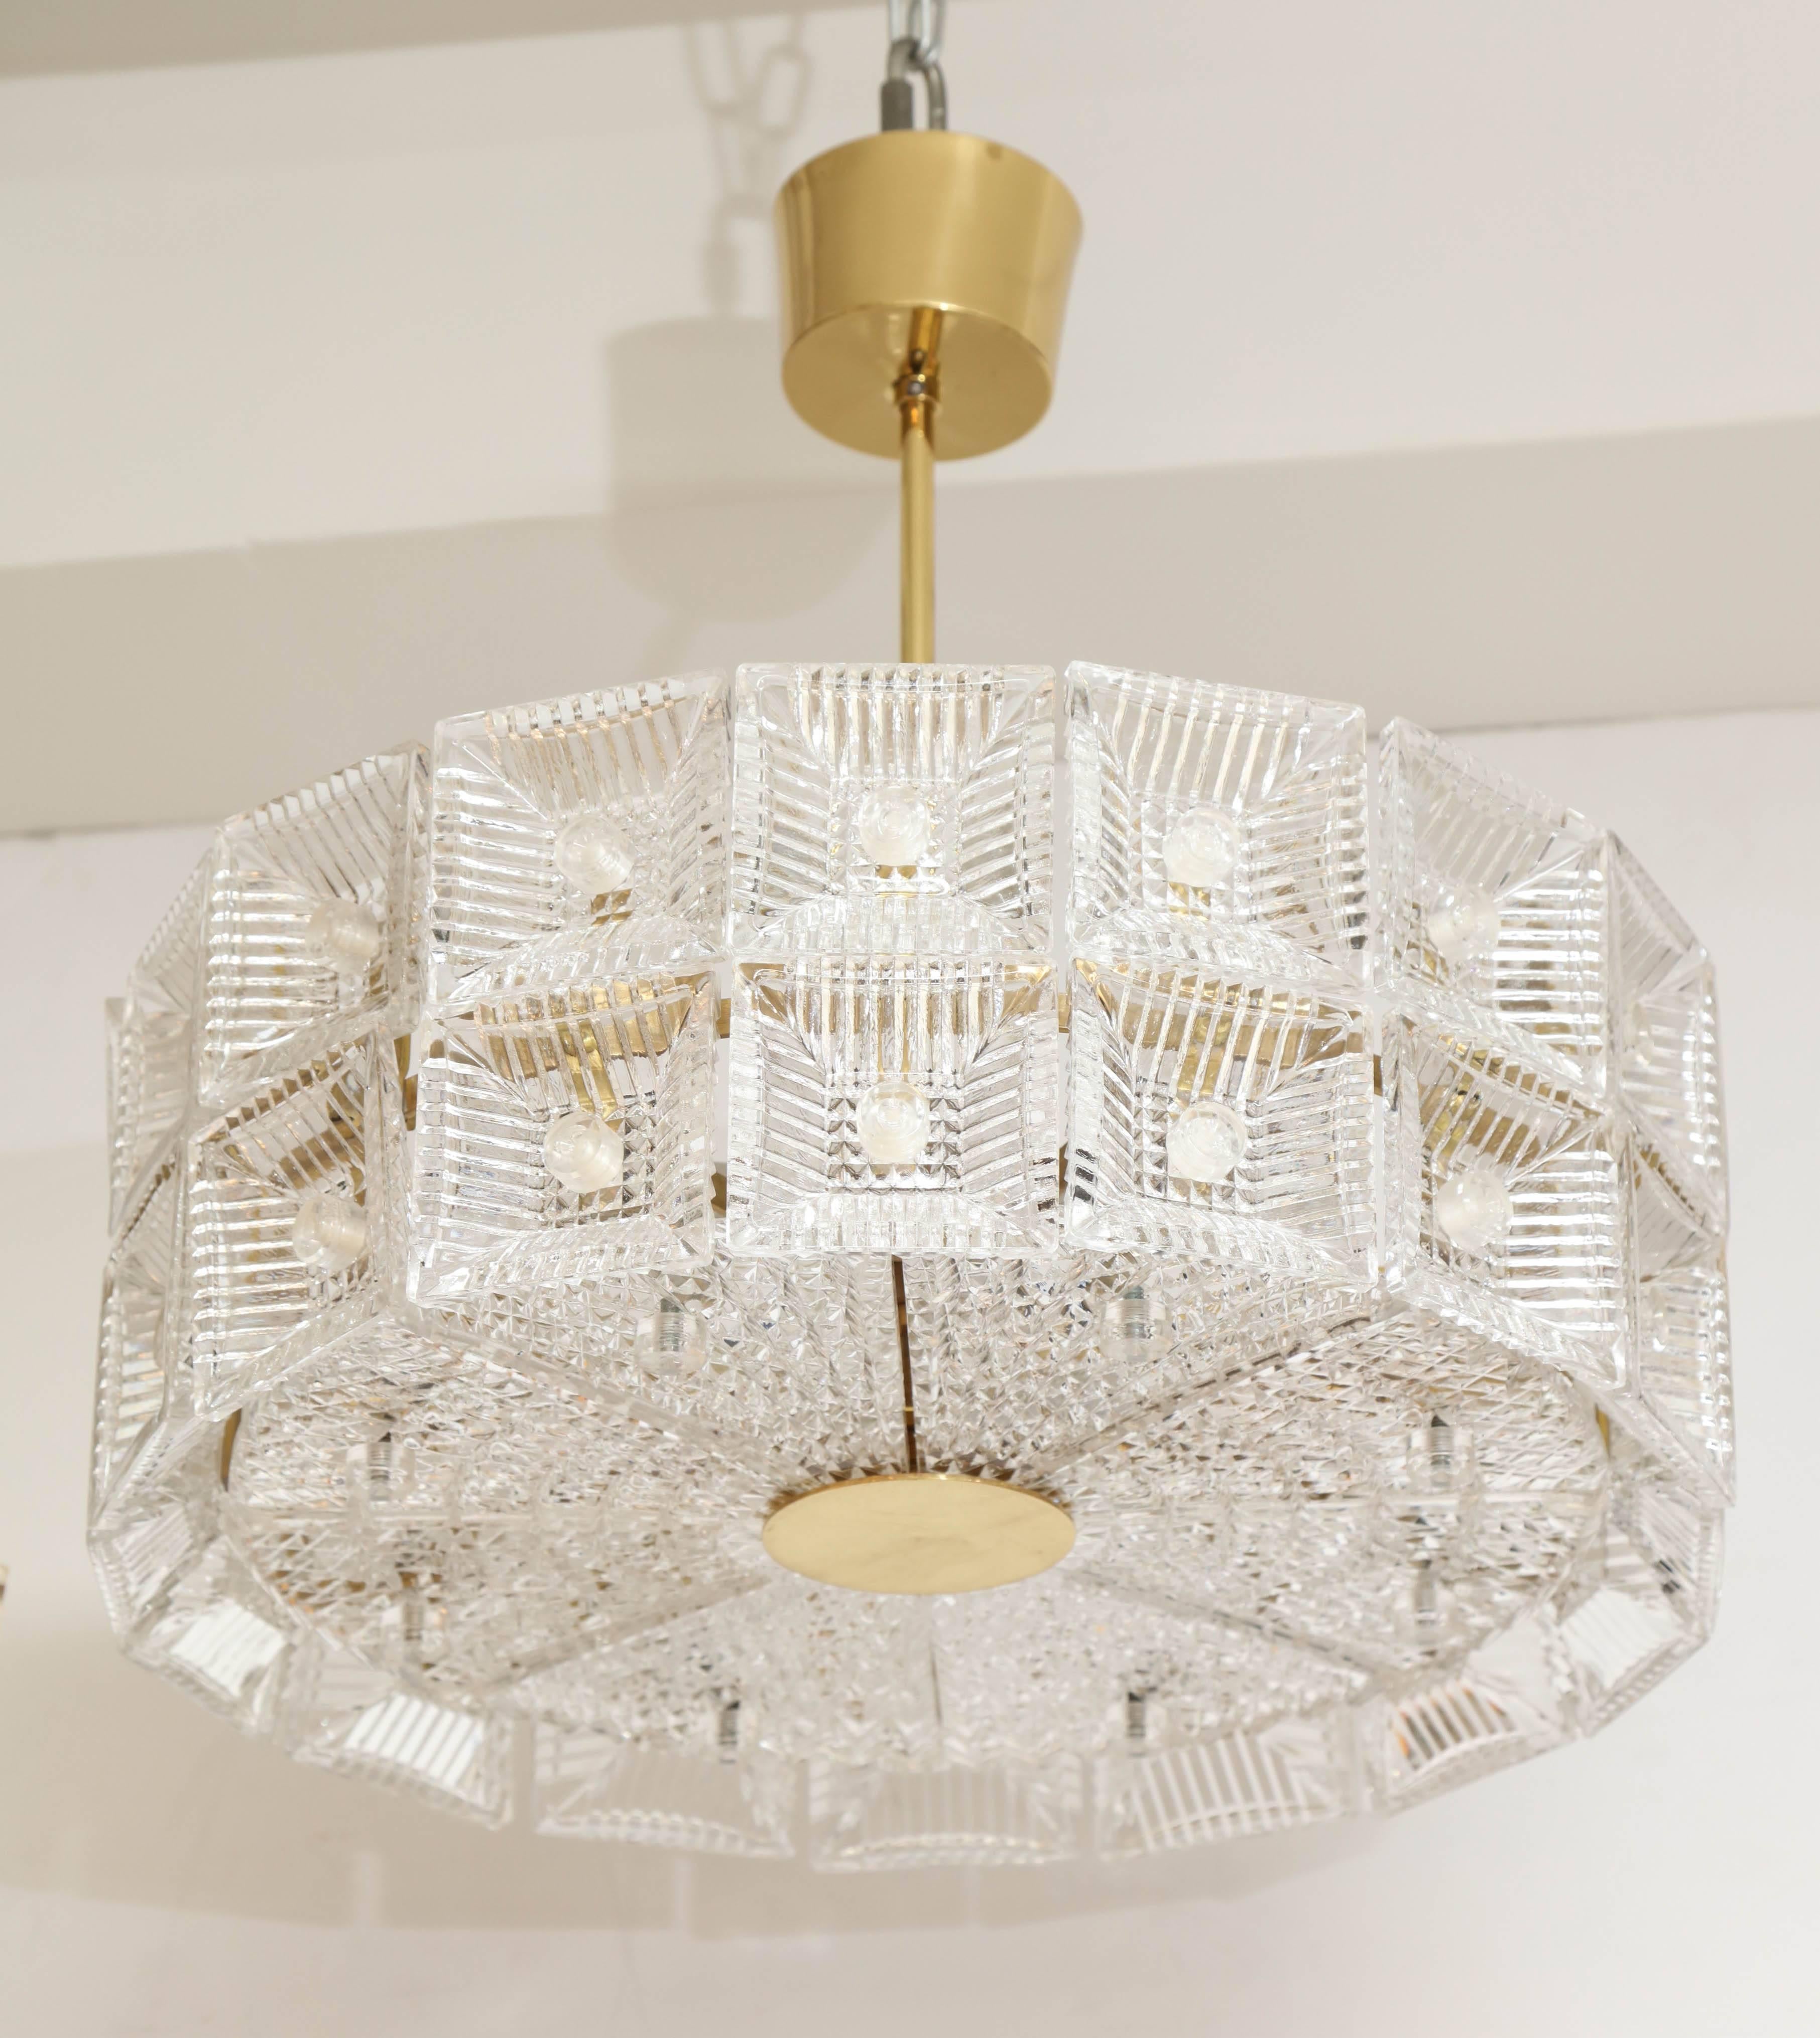 Large-scale Orrefors chandelier composed of two rows of square crystal elements and eight pie shaped pieces around the bottom all suspended on a brass frame stem and canopy. Rewired for use in the USA.